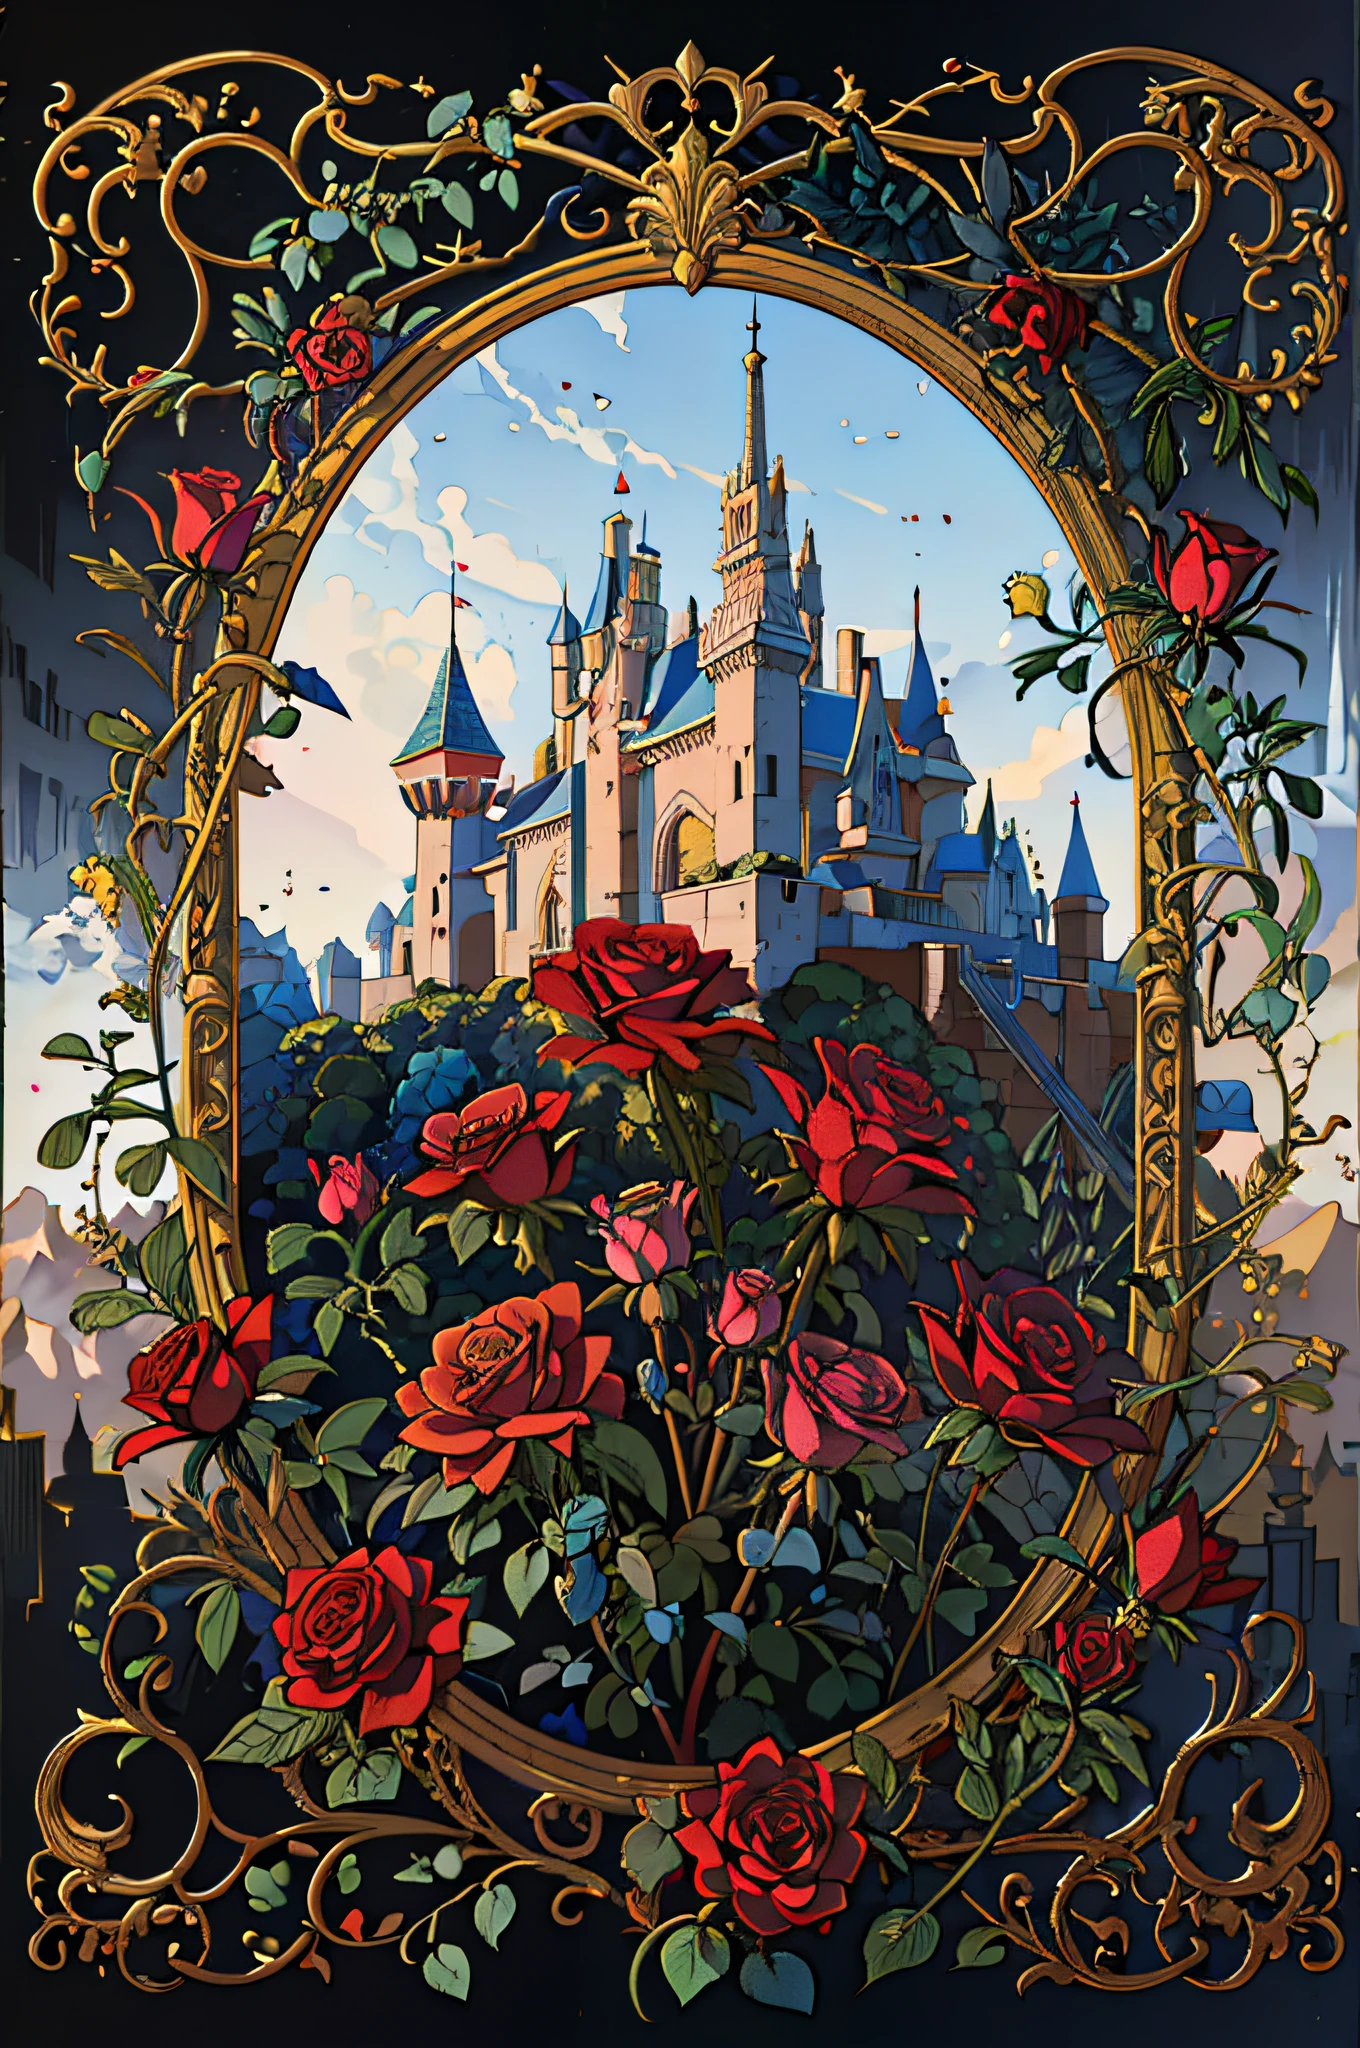 Minimalist image of a castle with red roses in the foreground, arte disney, beautiful castle, magic castle, disneyland background, concept art Disney, fairytale artwork, fairytale painting, golden frame with red roses, fancy, greg hildebrandt highly detailed, fancy arte vitoriana, beautiful render of a fairytale